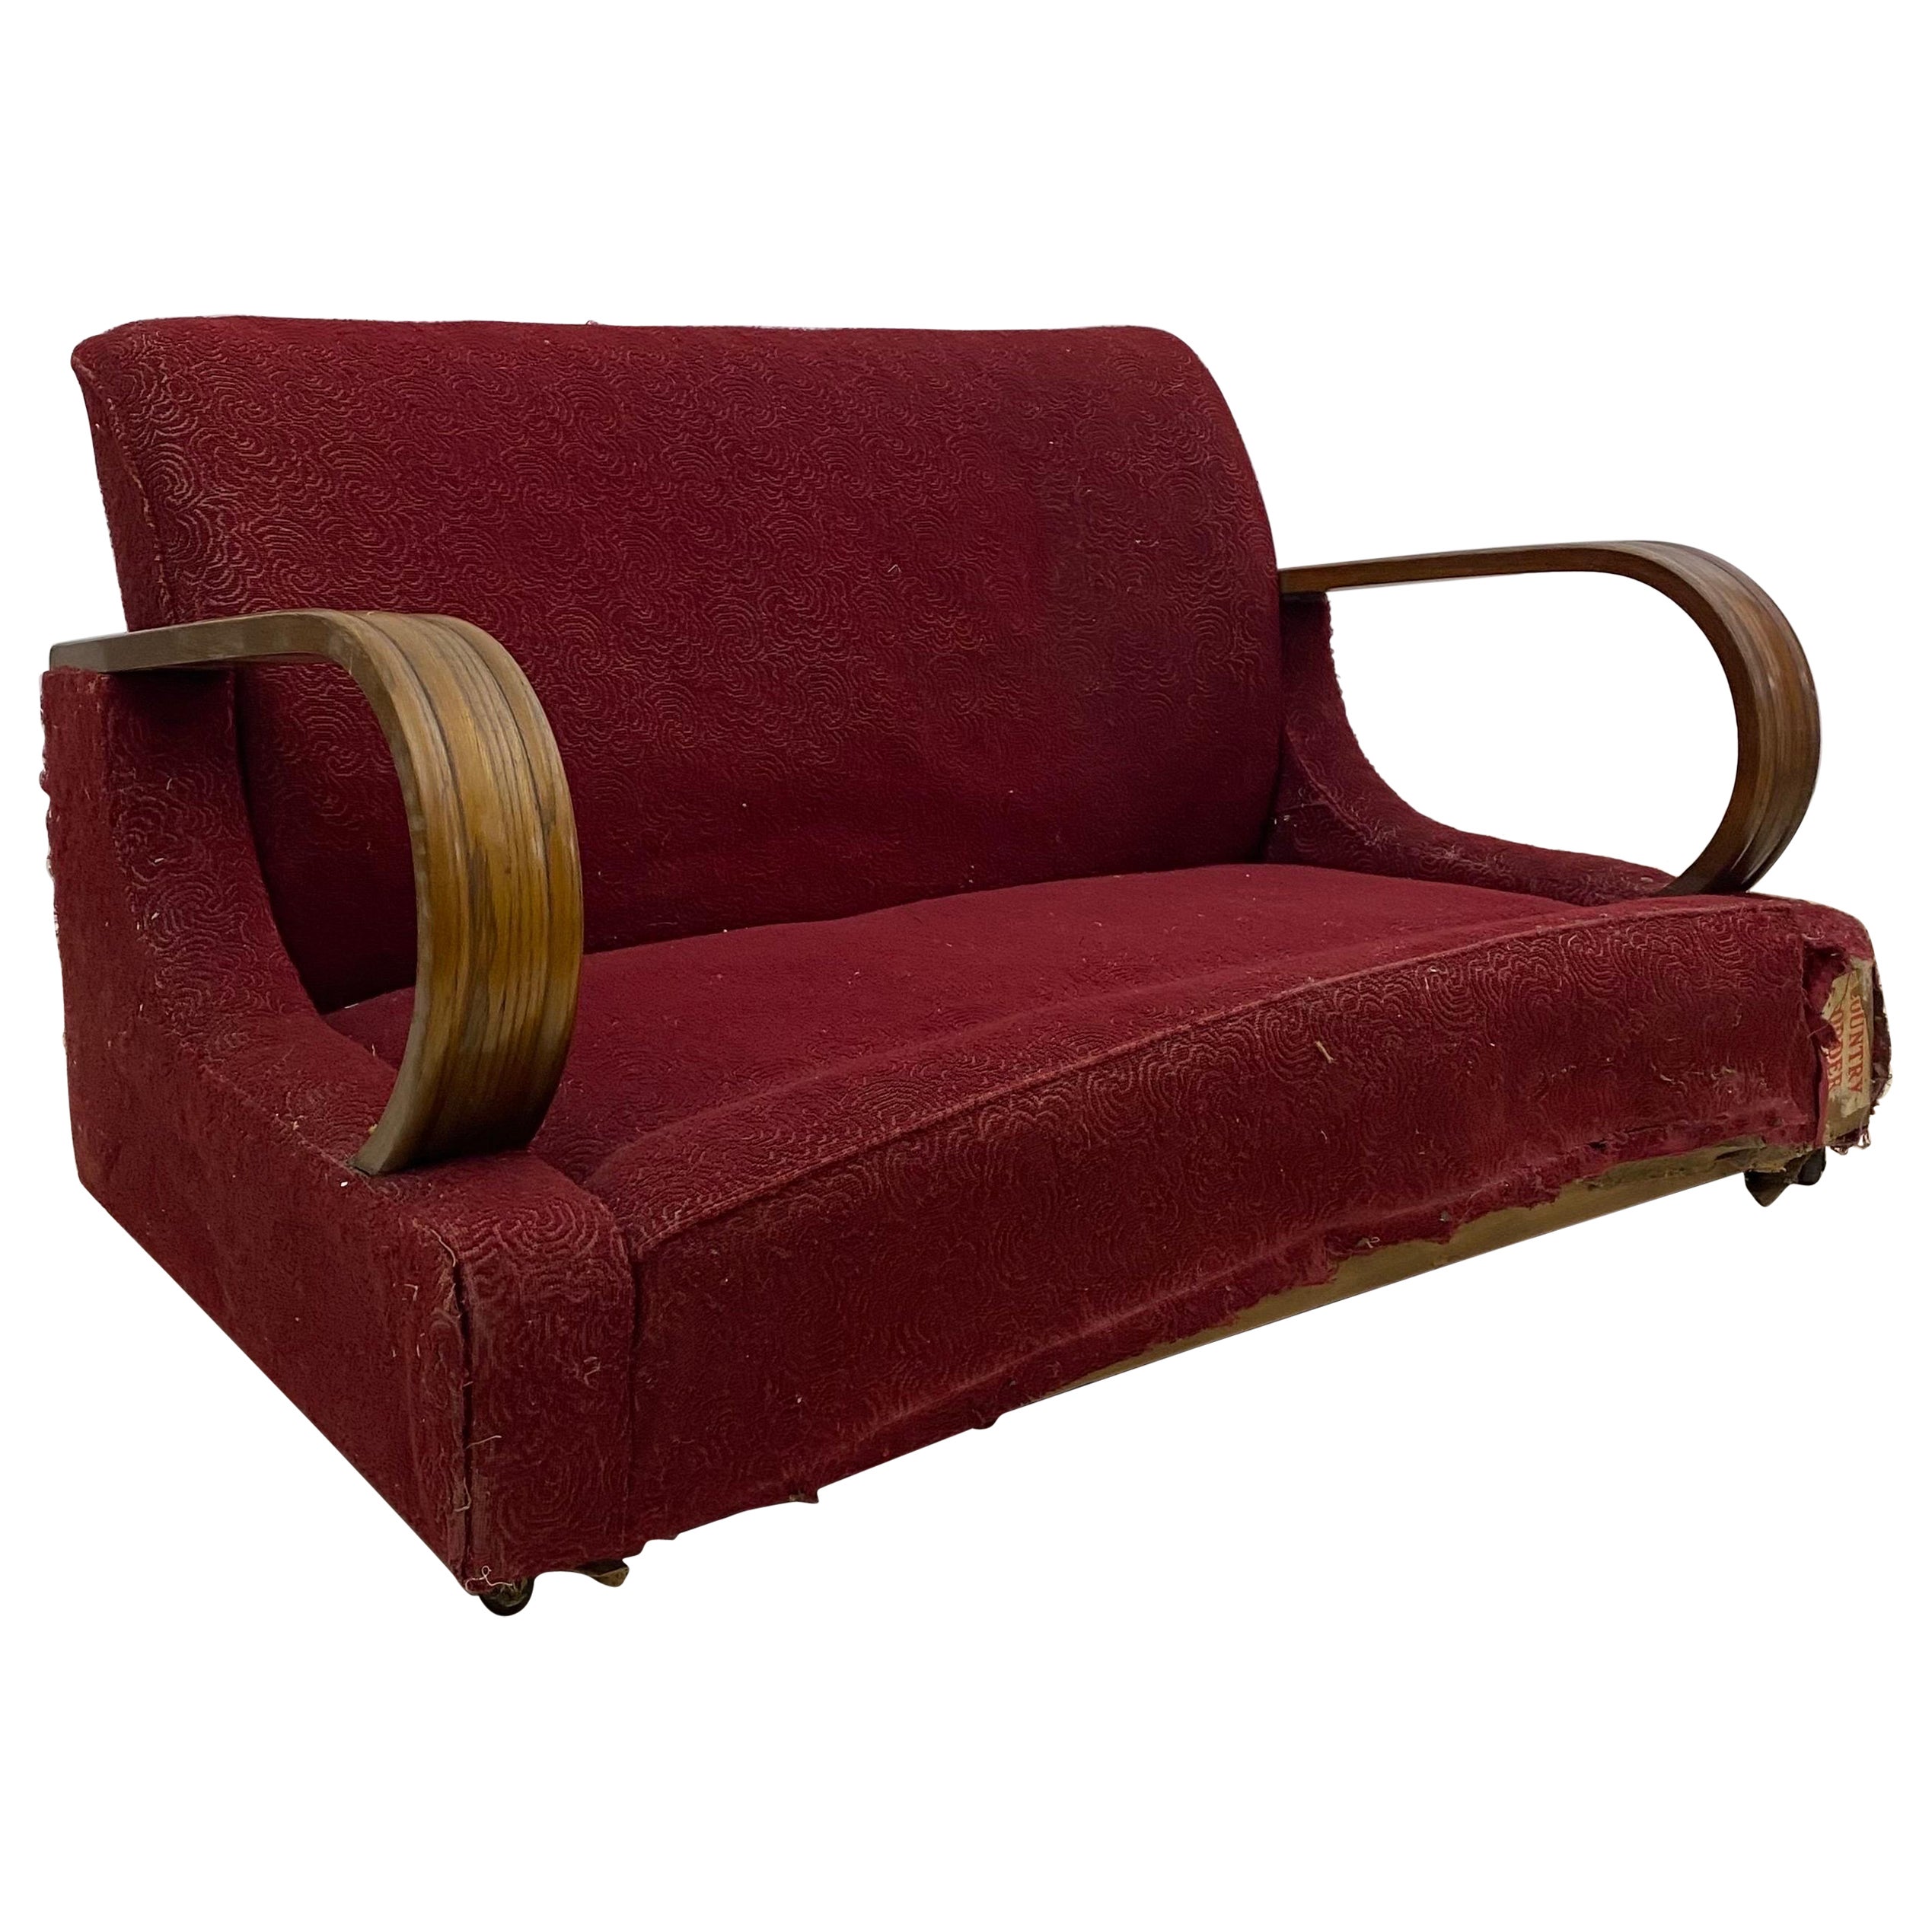 Art Deco 1940s Red Two Seater Distressed Sofa Restoration Project As Seen Poirot For Sale